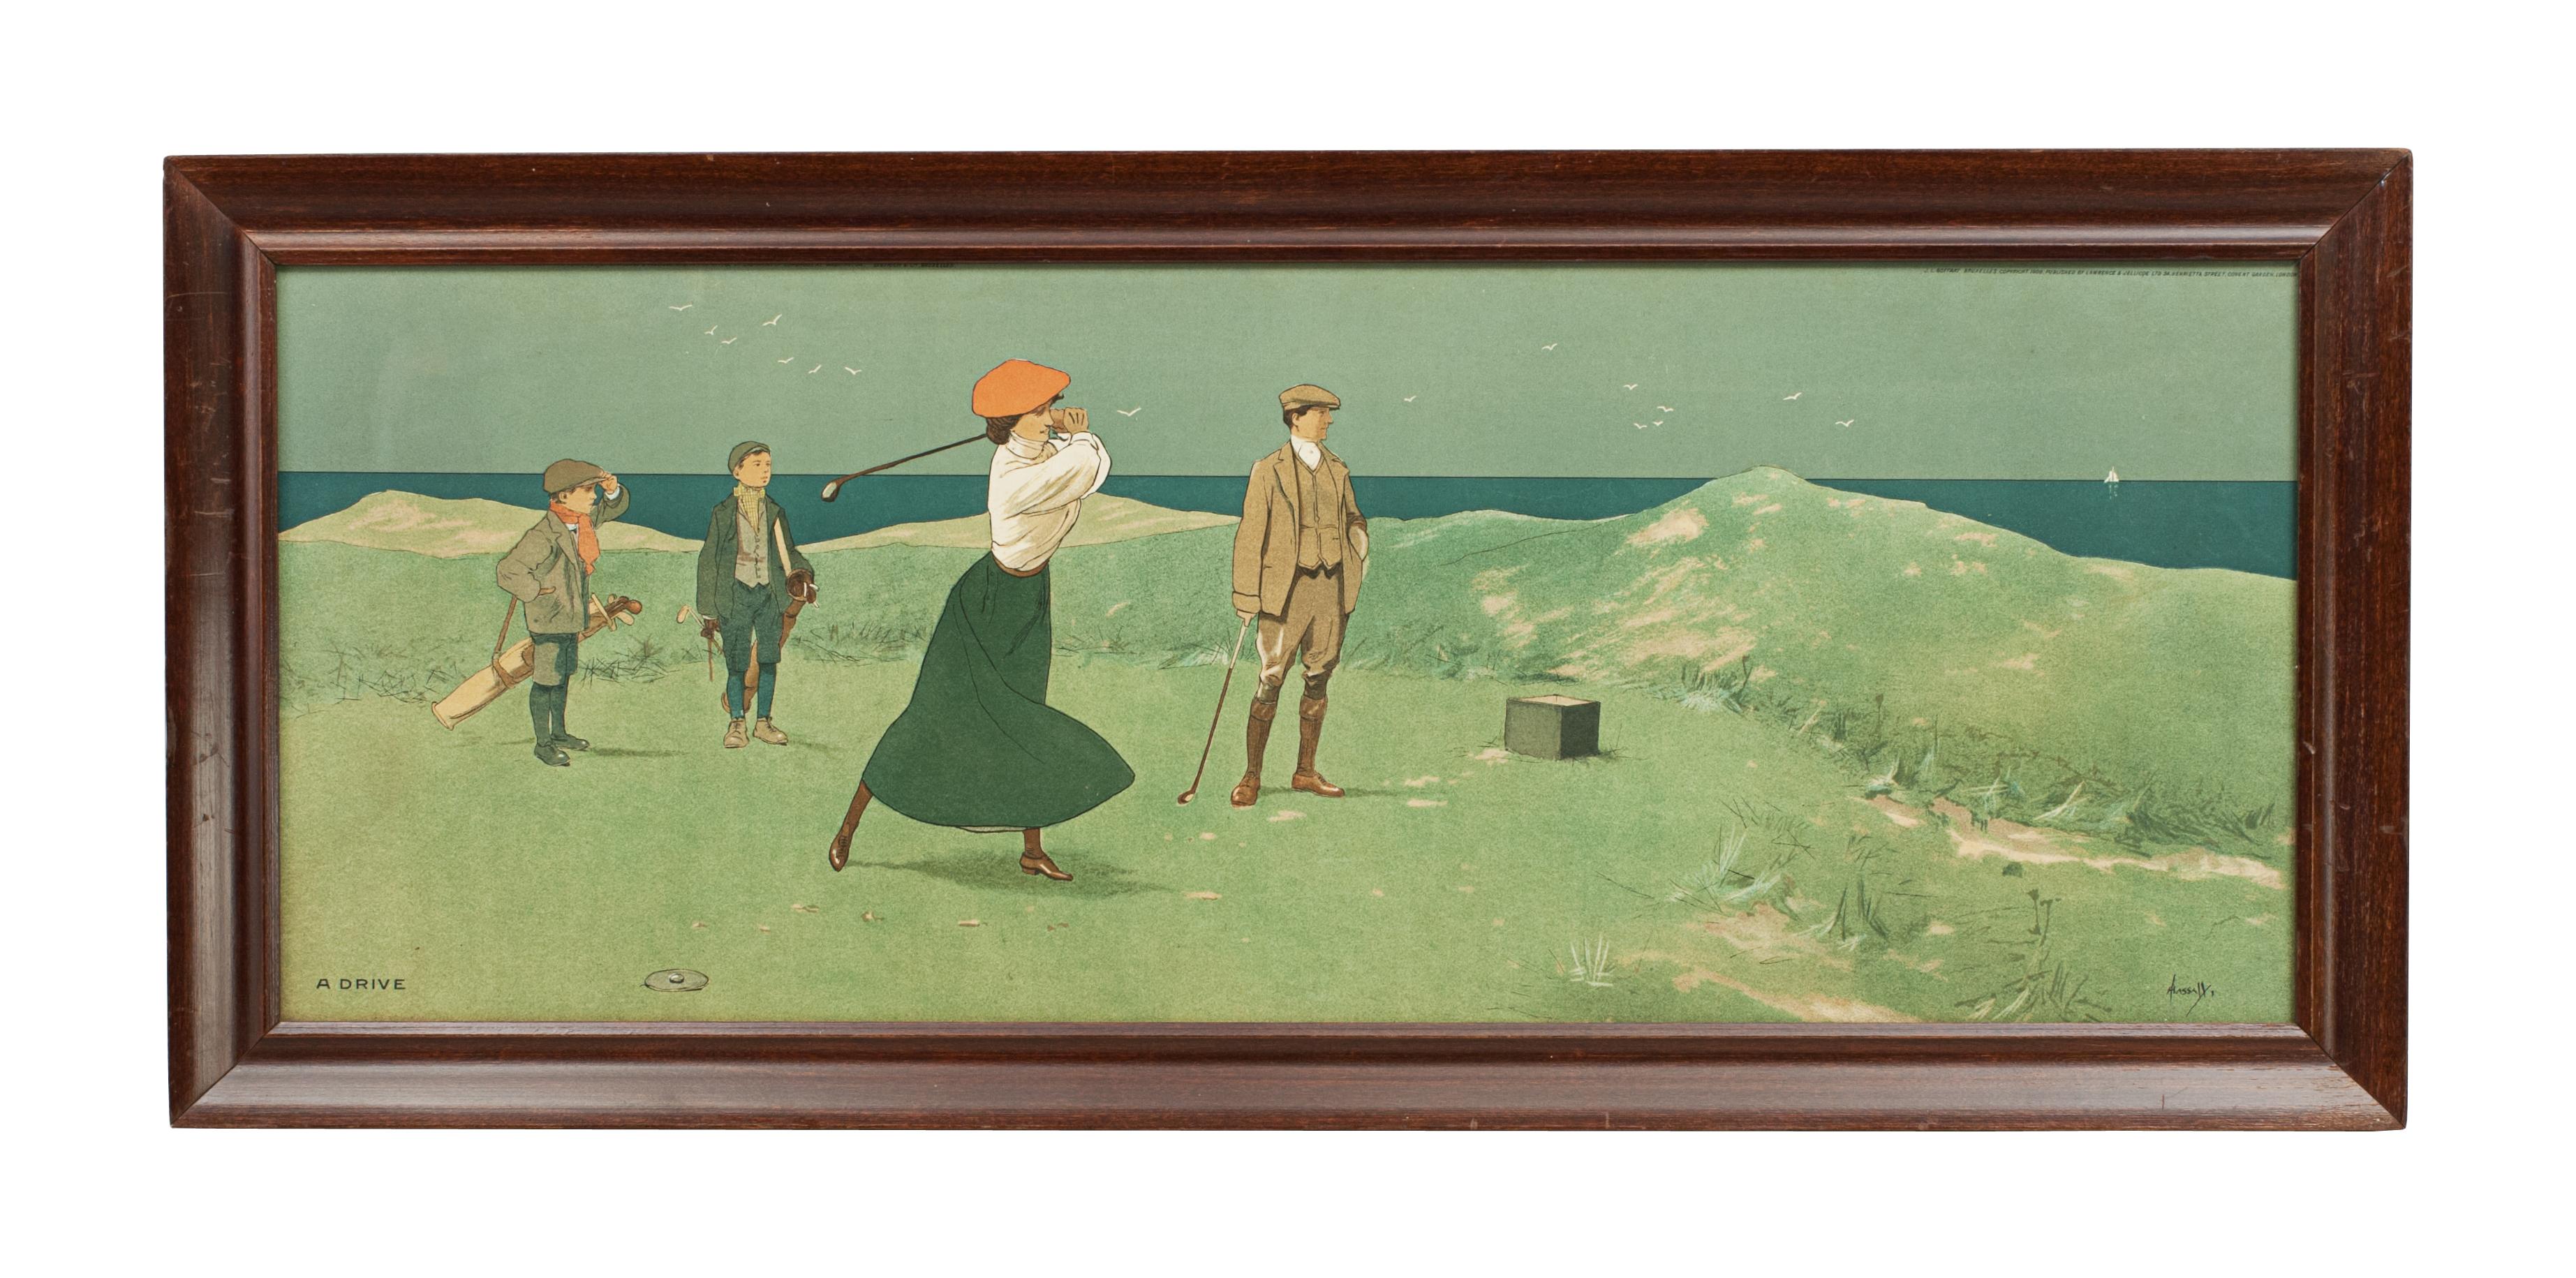 Vintage golf print by John Hassall.
A very nice framed golfing chromolithograph after J. Hassall entitled 'A Drive'. The picture depicts a female golfer on a links course teeing off. She is being watched by her male partner and both caddies.